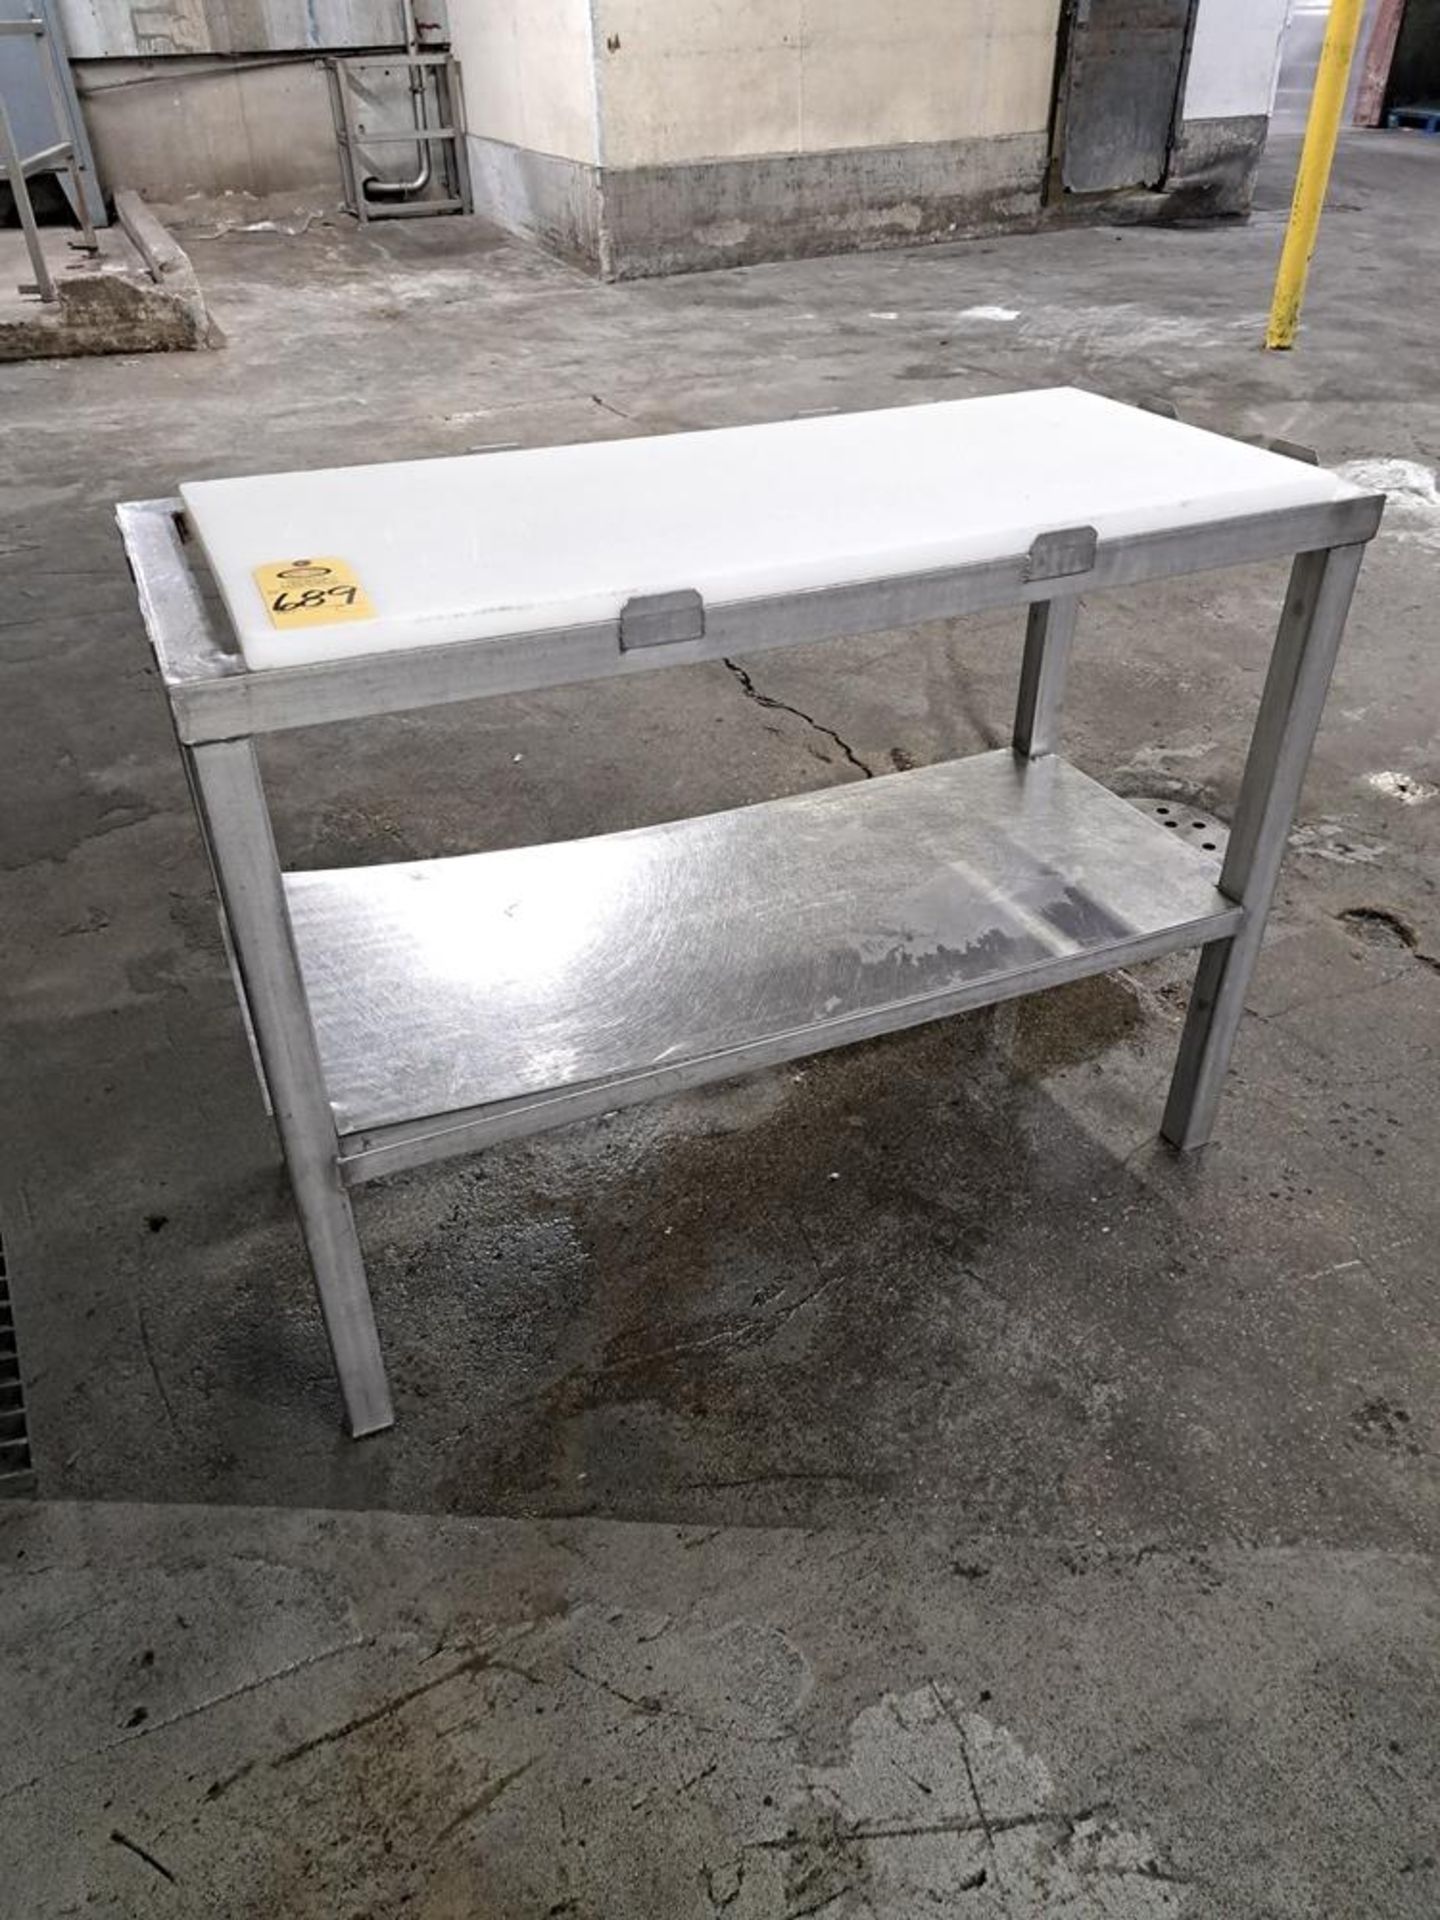 Stainless Steel Table, 21" W X 4' L, partial poly top: Required Loading Fee $100.00, Rigger-Norm